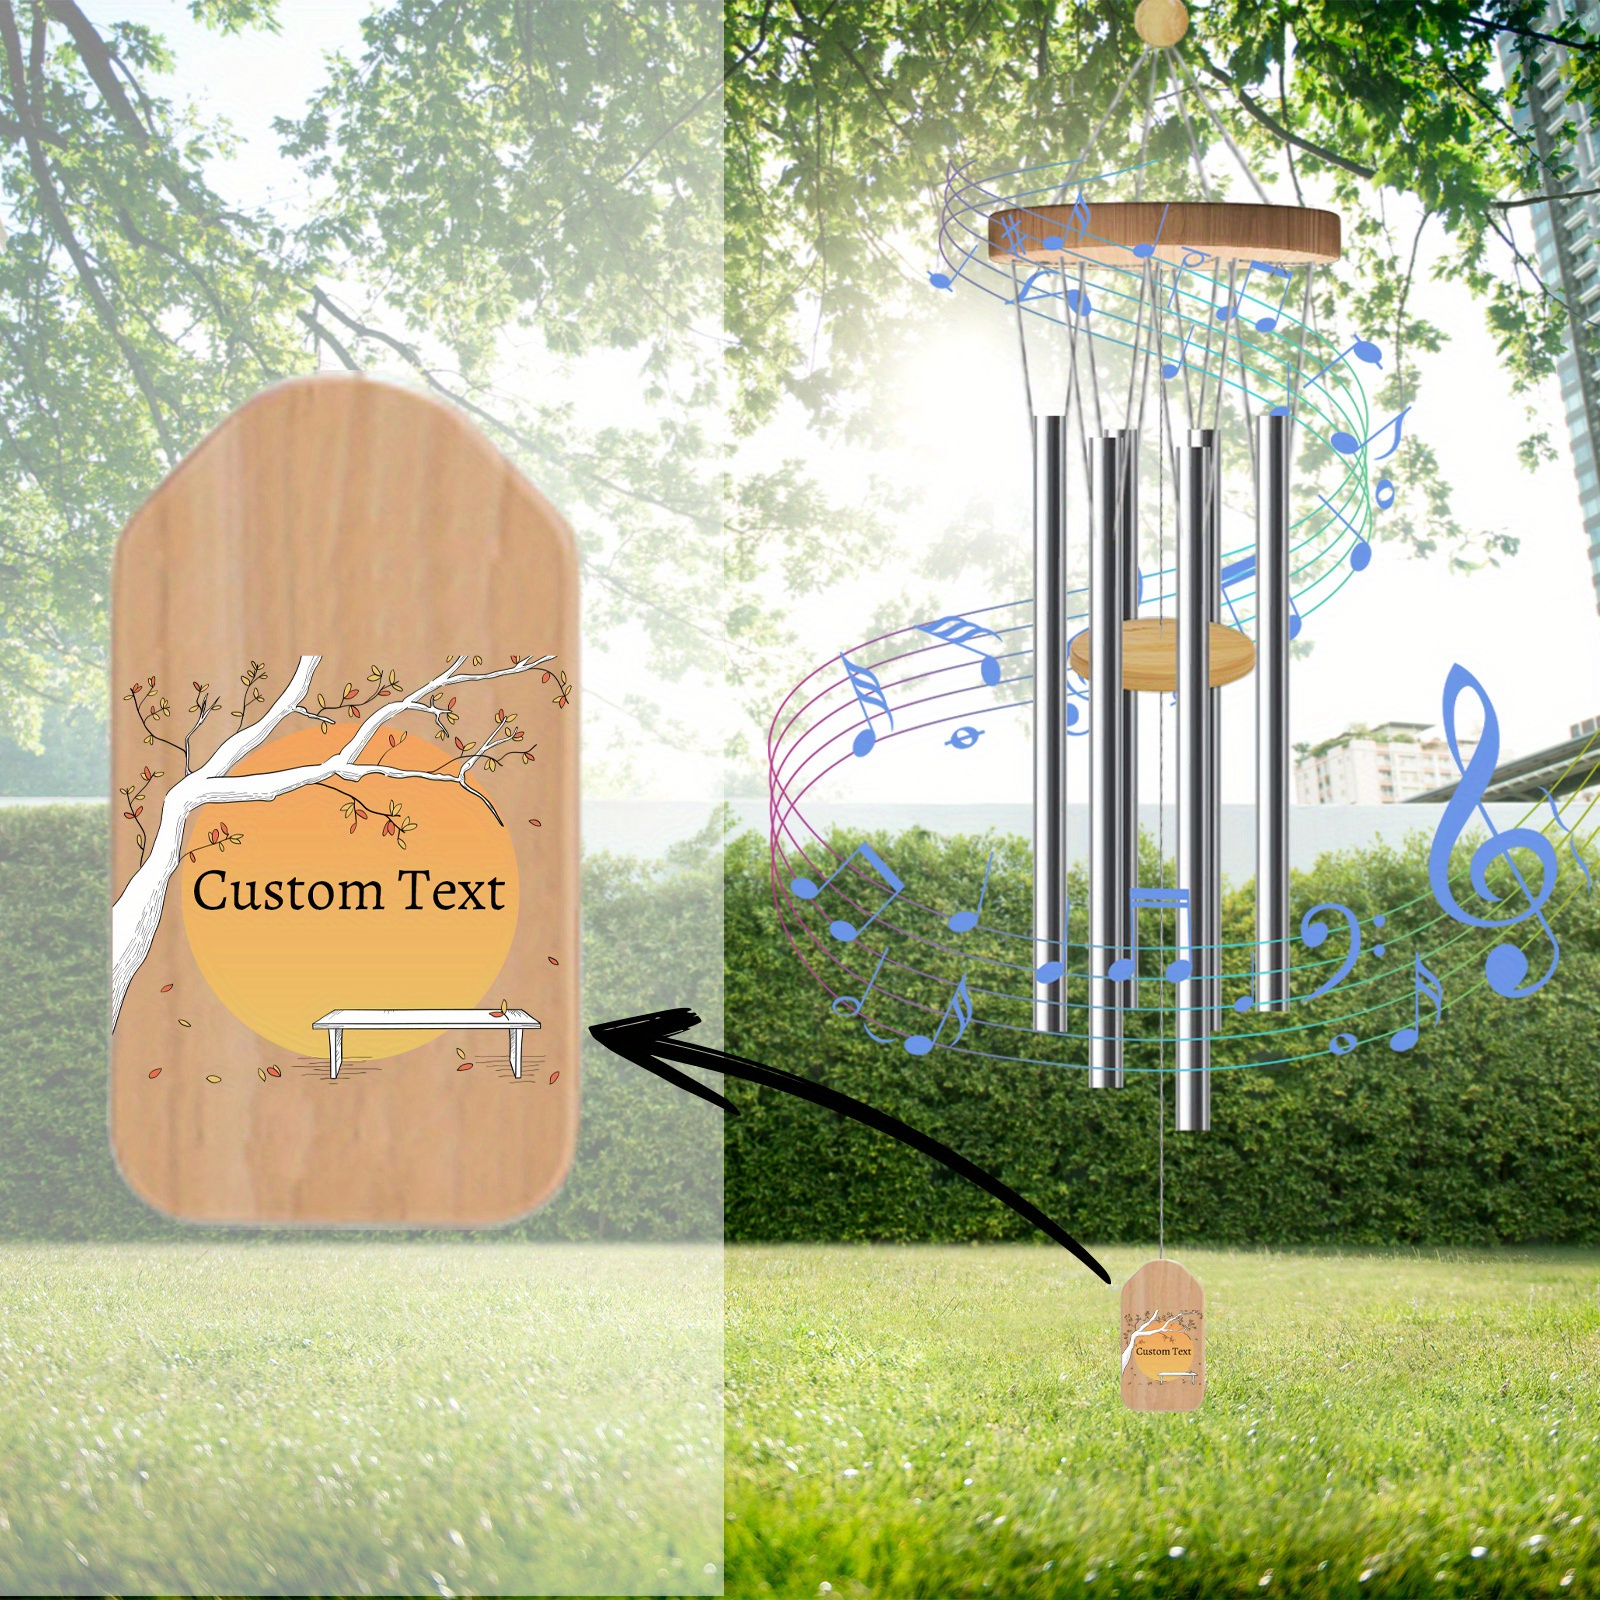 

1pc, Unique Handcrafted Outdoor Wind Chime, Melodious Bells With 6 Metal Tubes, Perfect For Enhancing Your Garden, Yard, Patio, Home Decor And Gifting